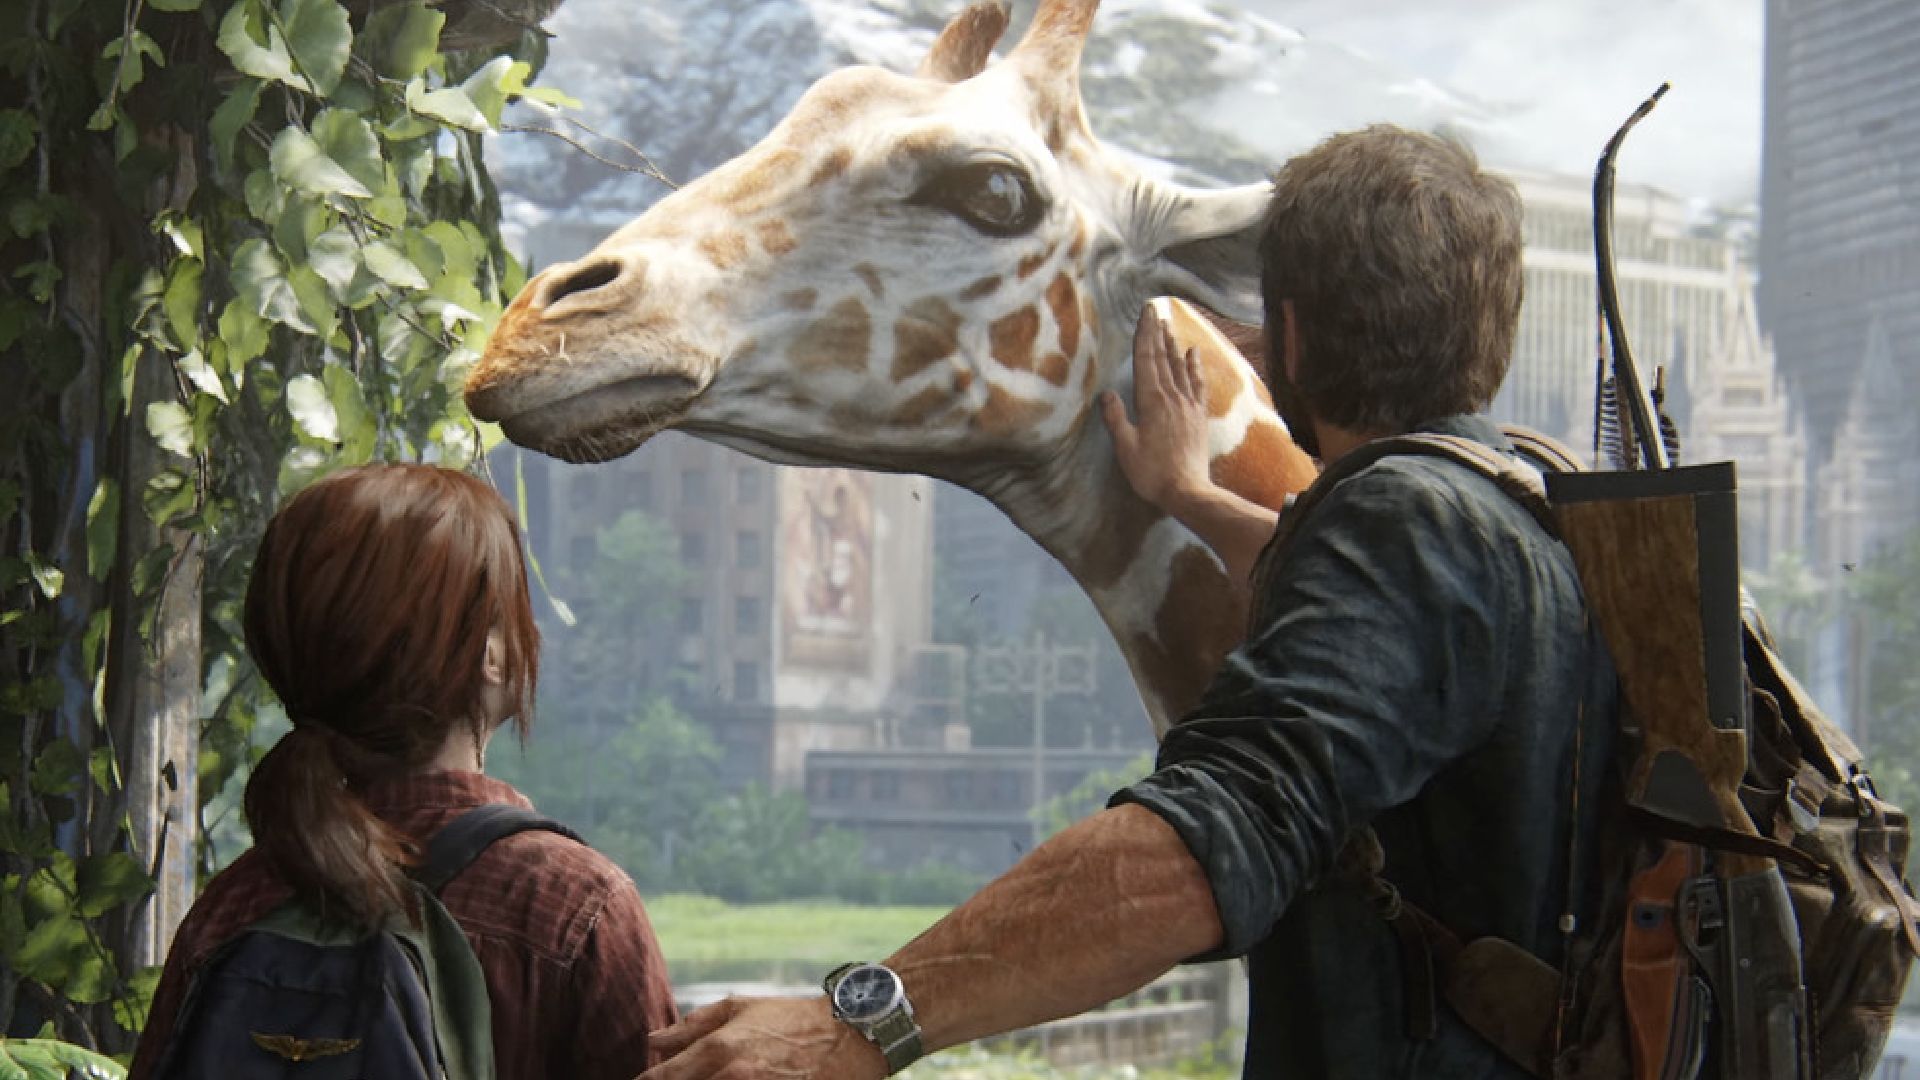 The Last of Us Part 1 walkthrough and guide